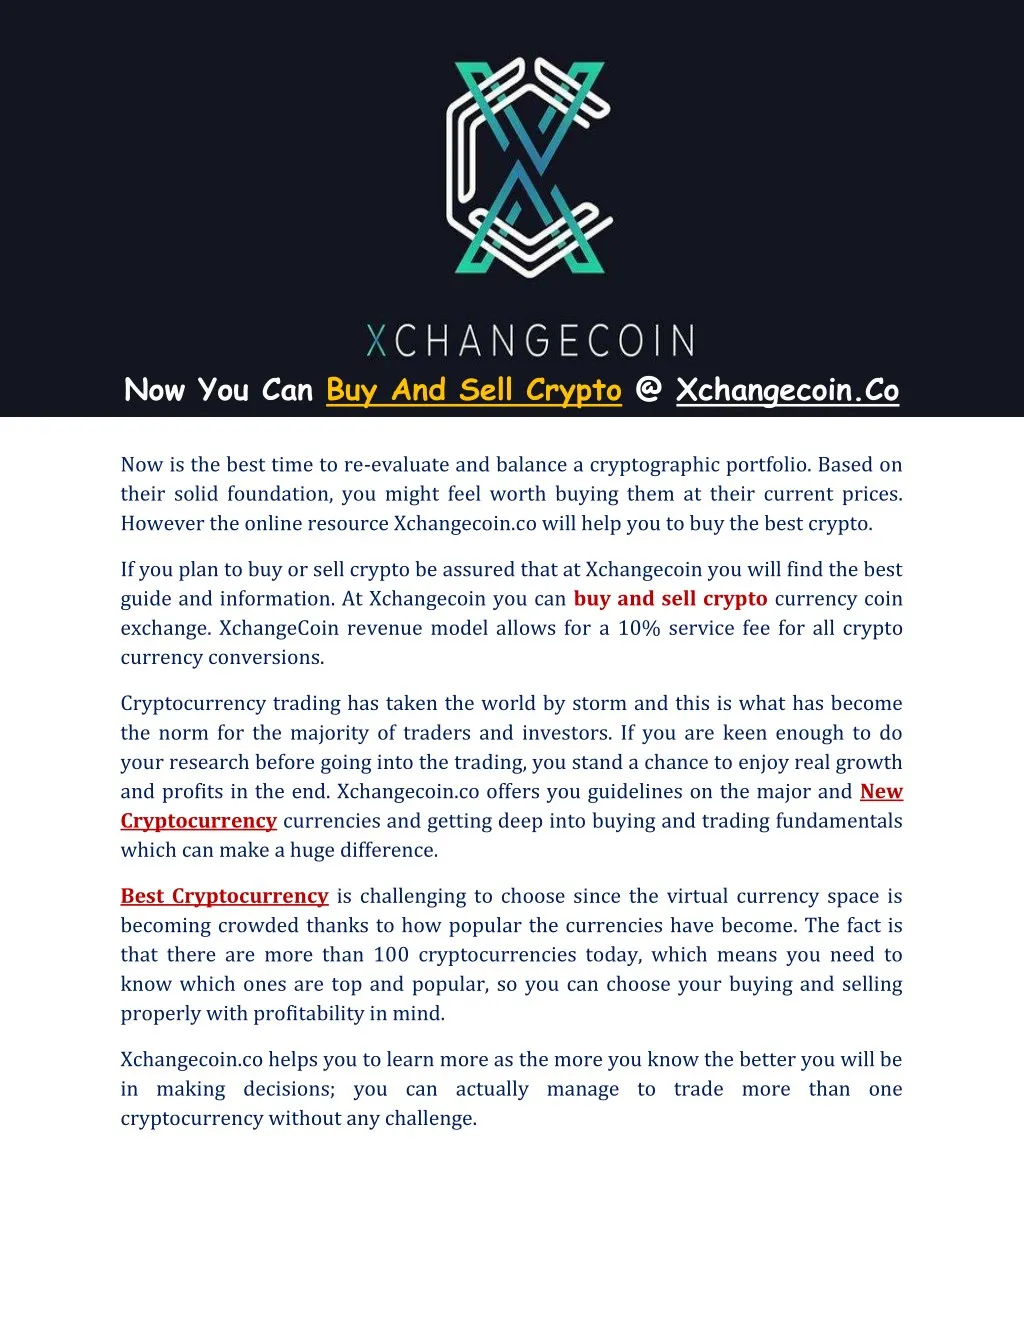 now you can buy and sell crypto @ xchangecoin co